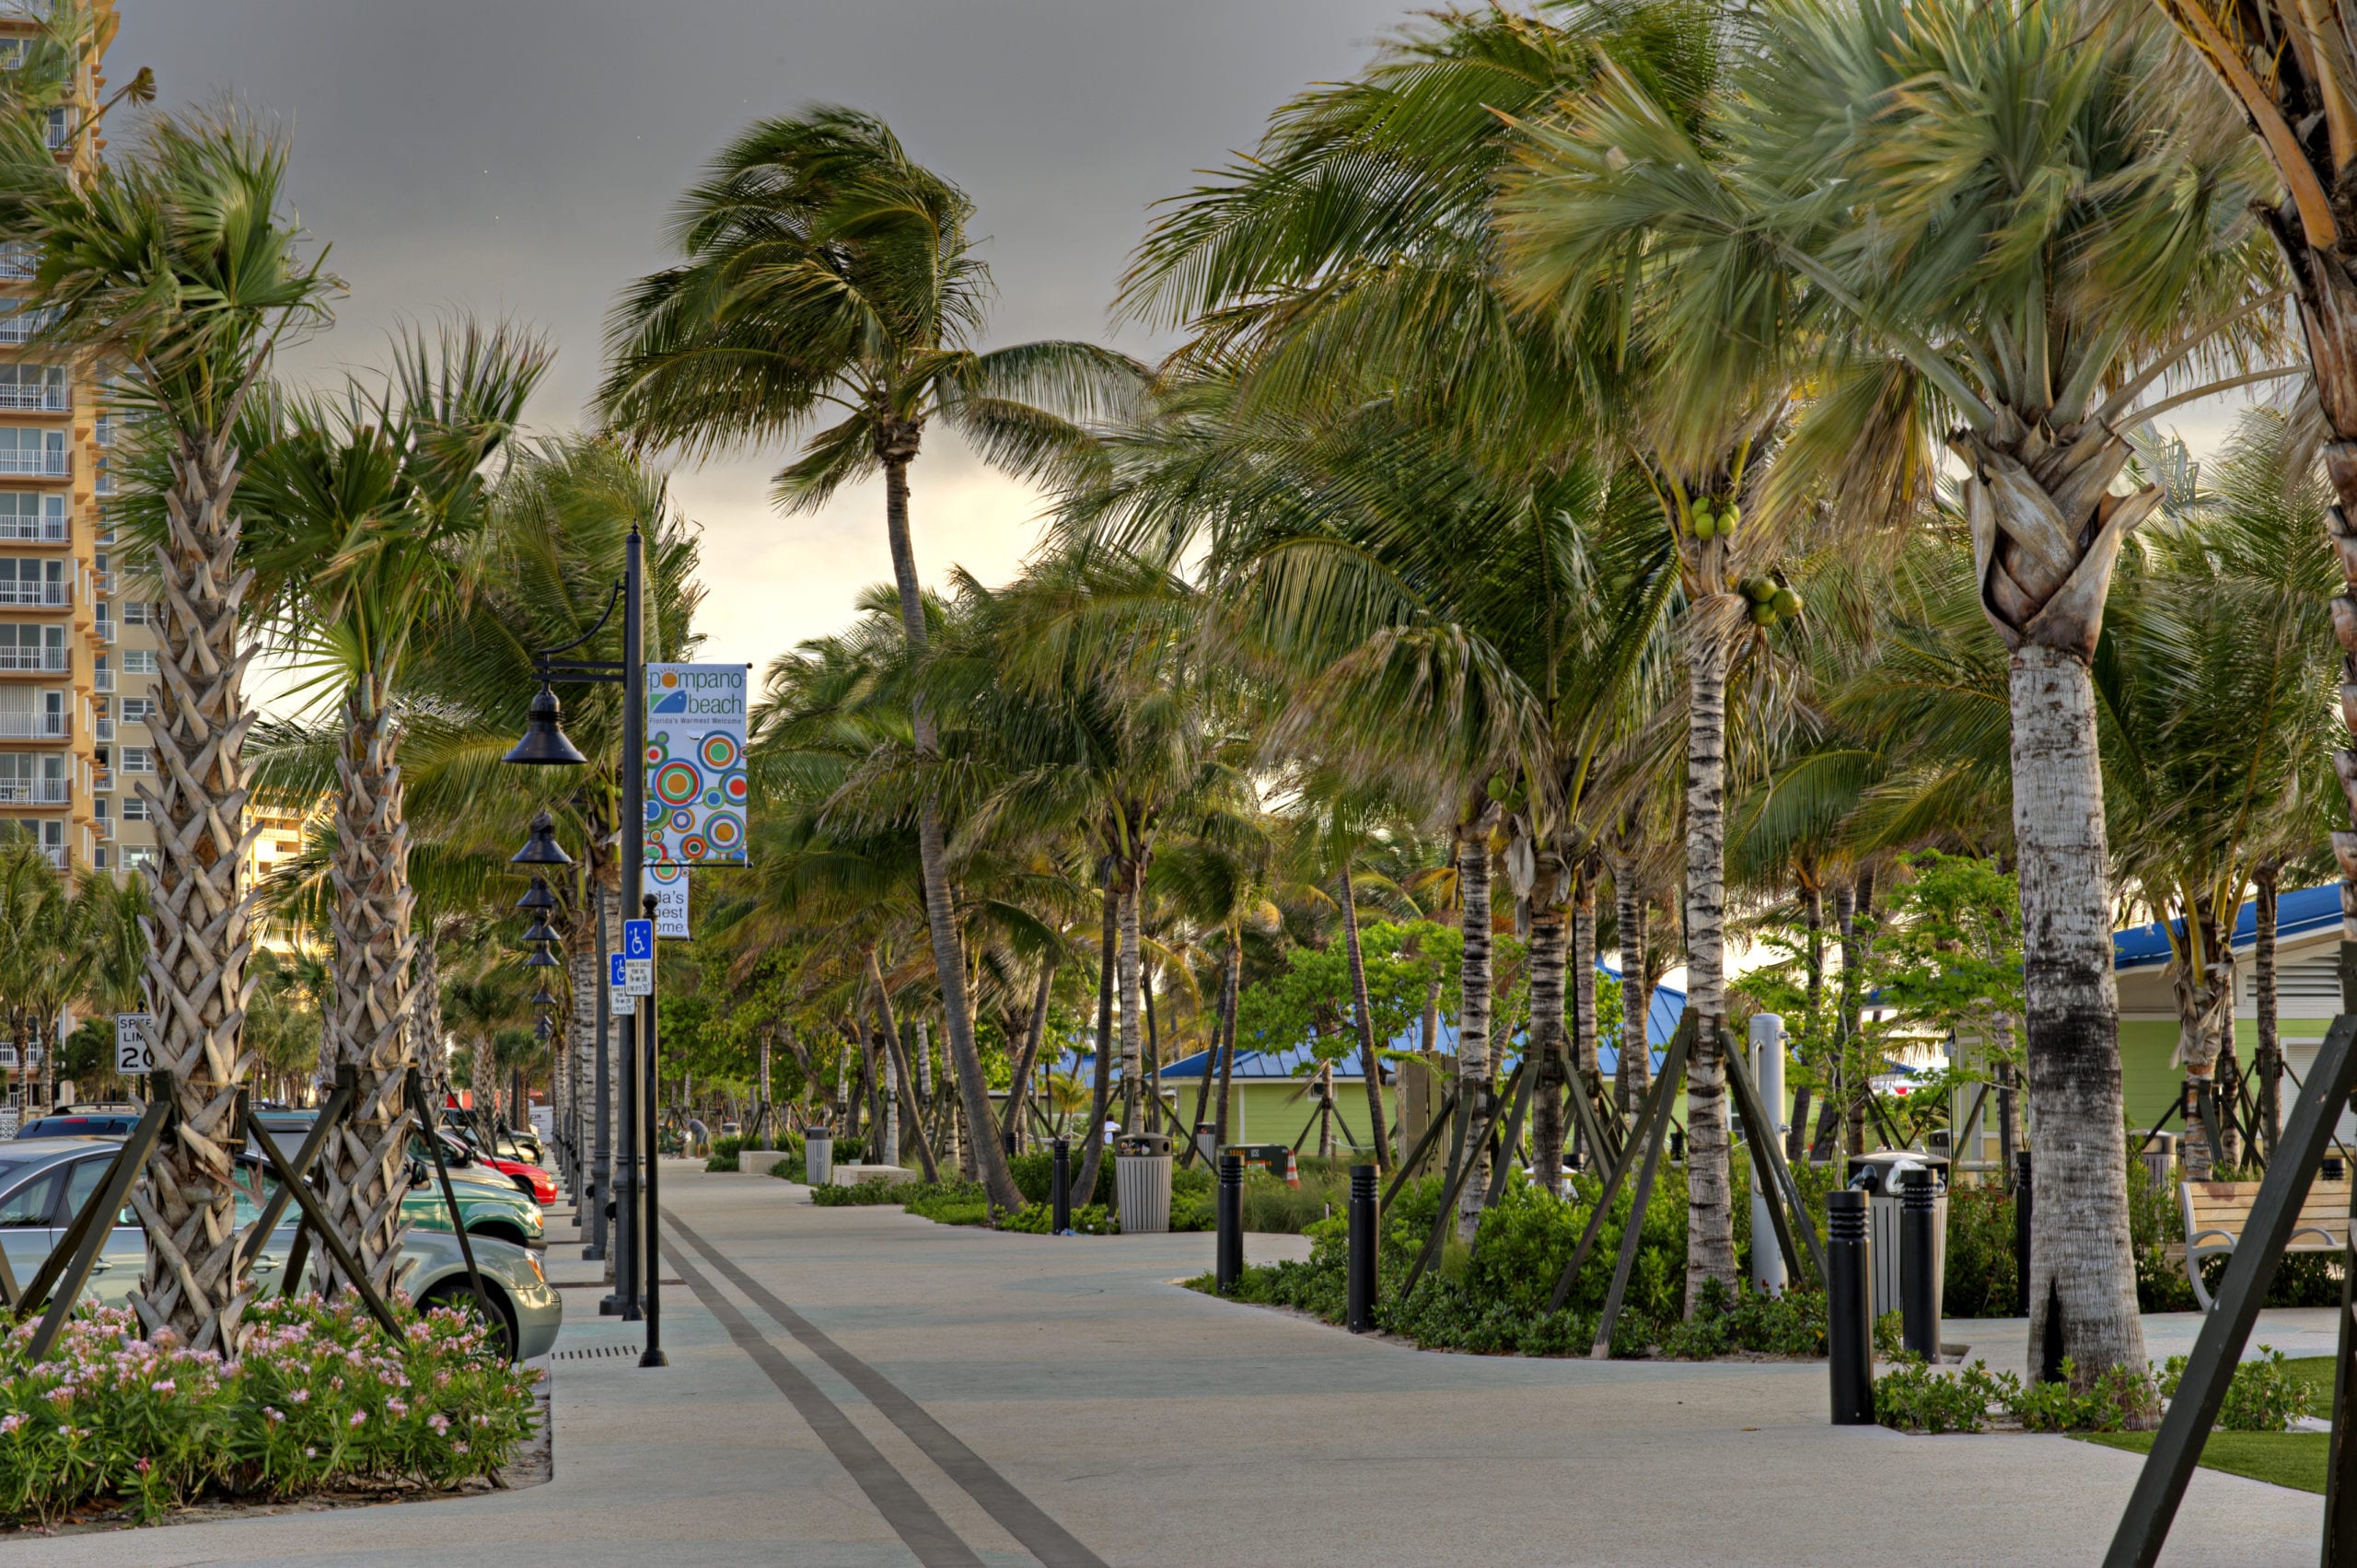 EDSA Pompano Beach Boulevard with car parking next to a walkway lined with palm trees